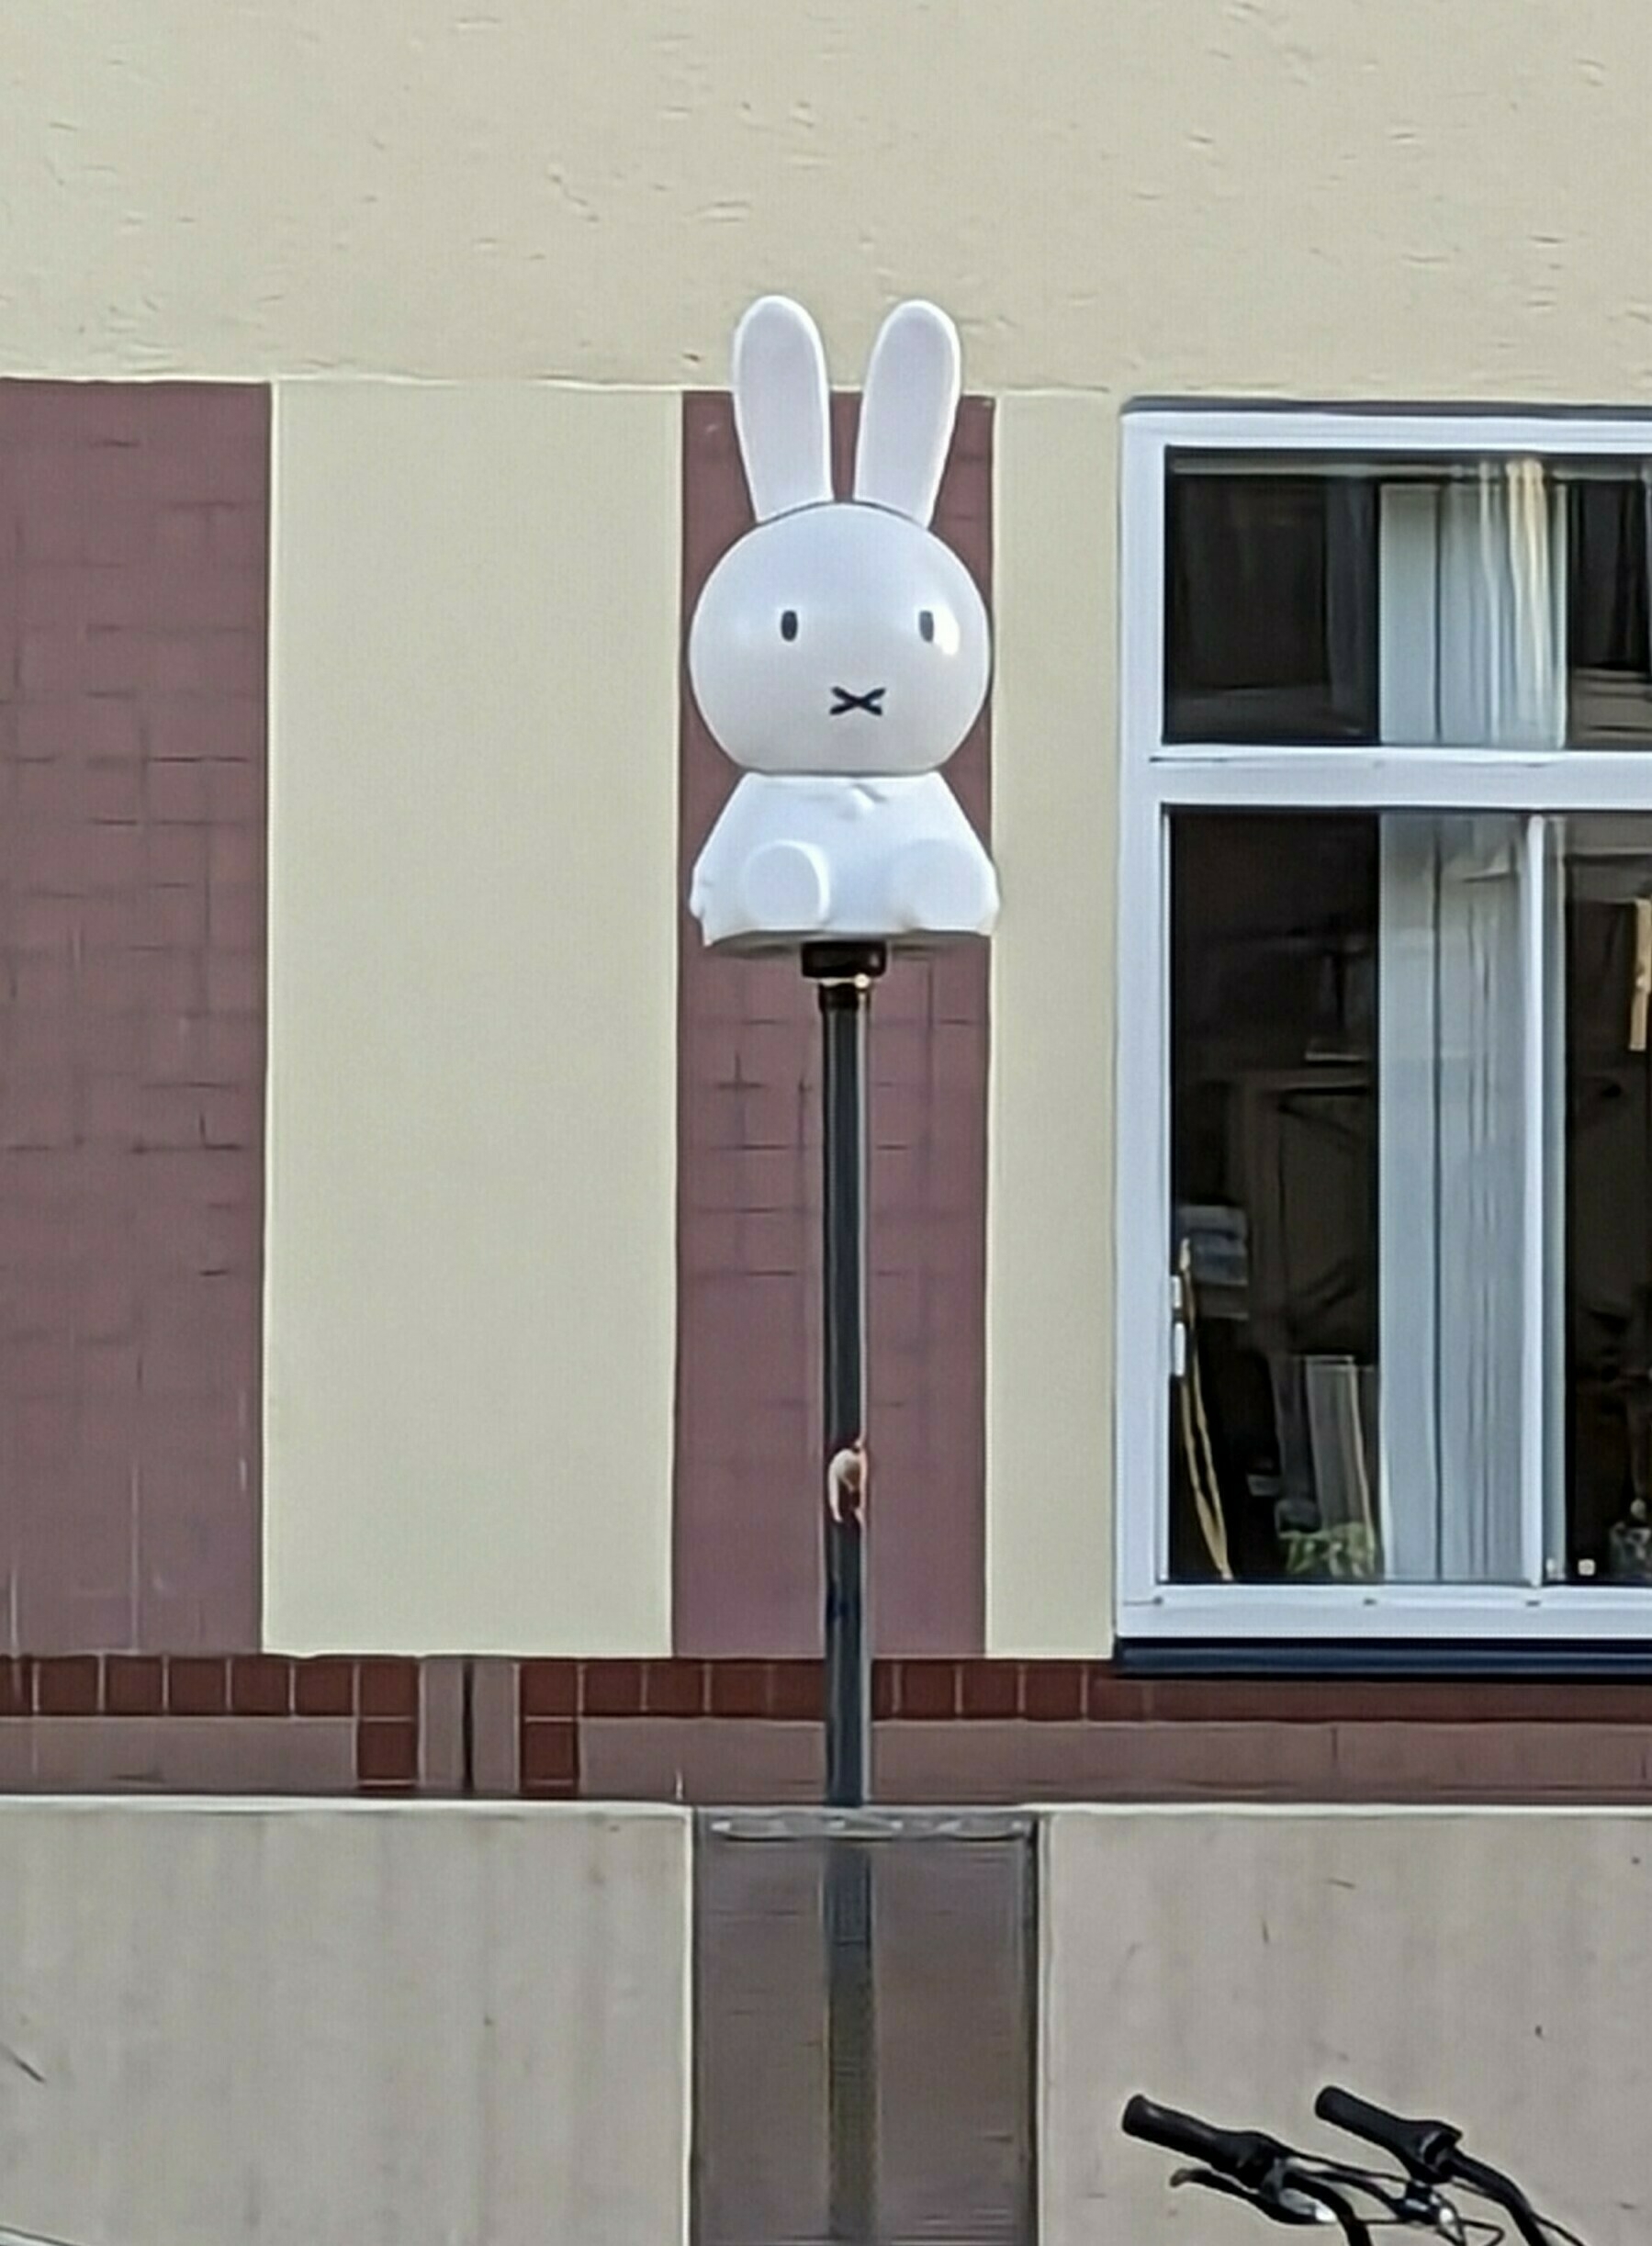 A street lamp that has been decorated to look like Nijntje (known as Miffy in English).